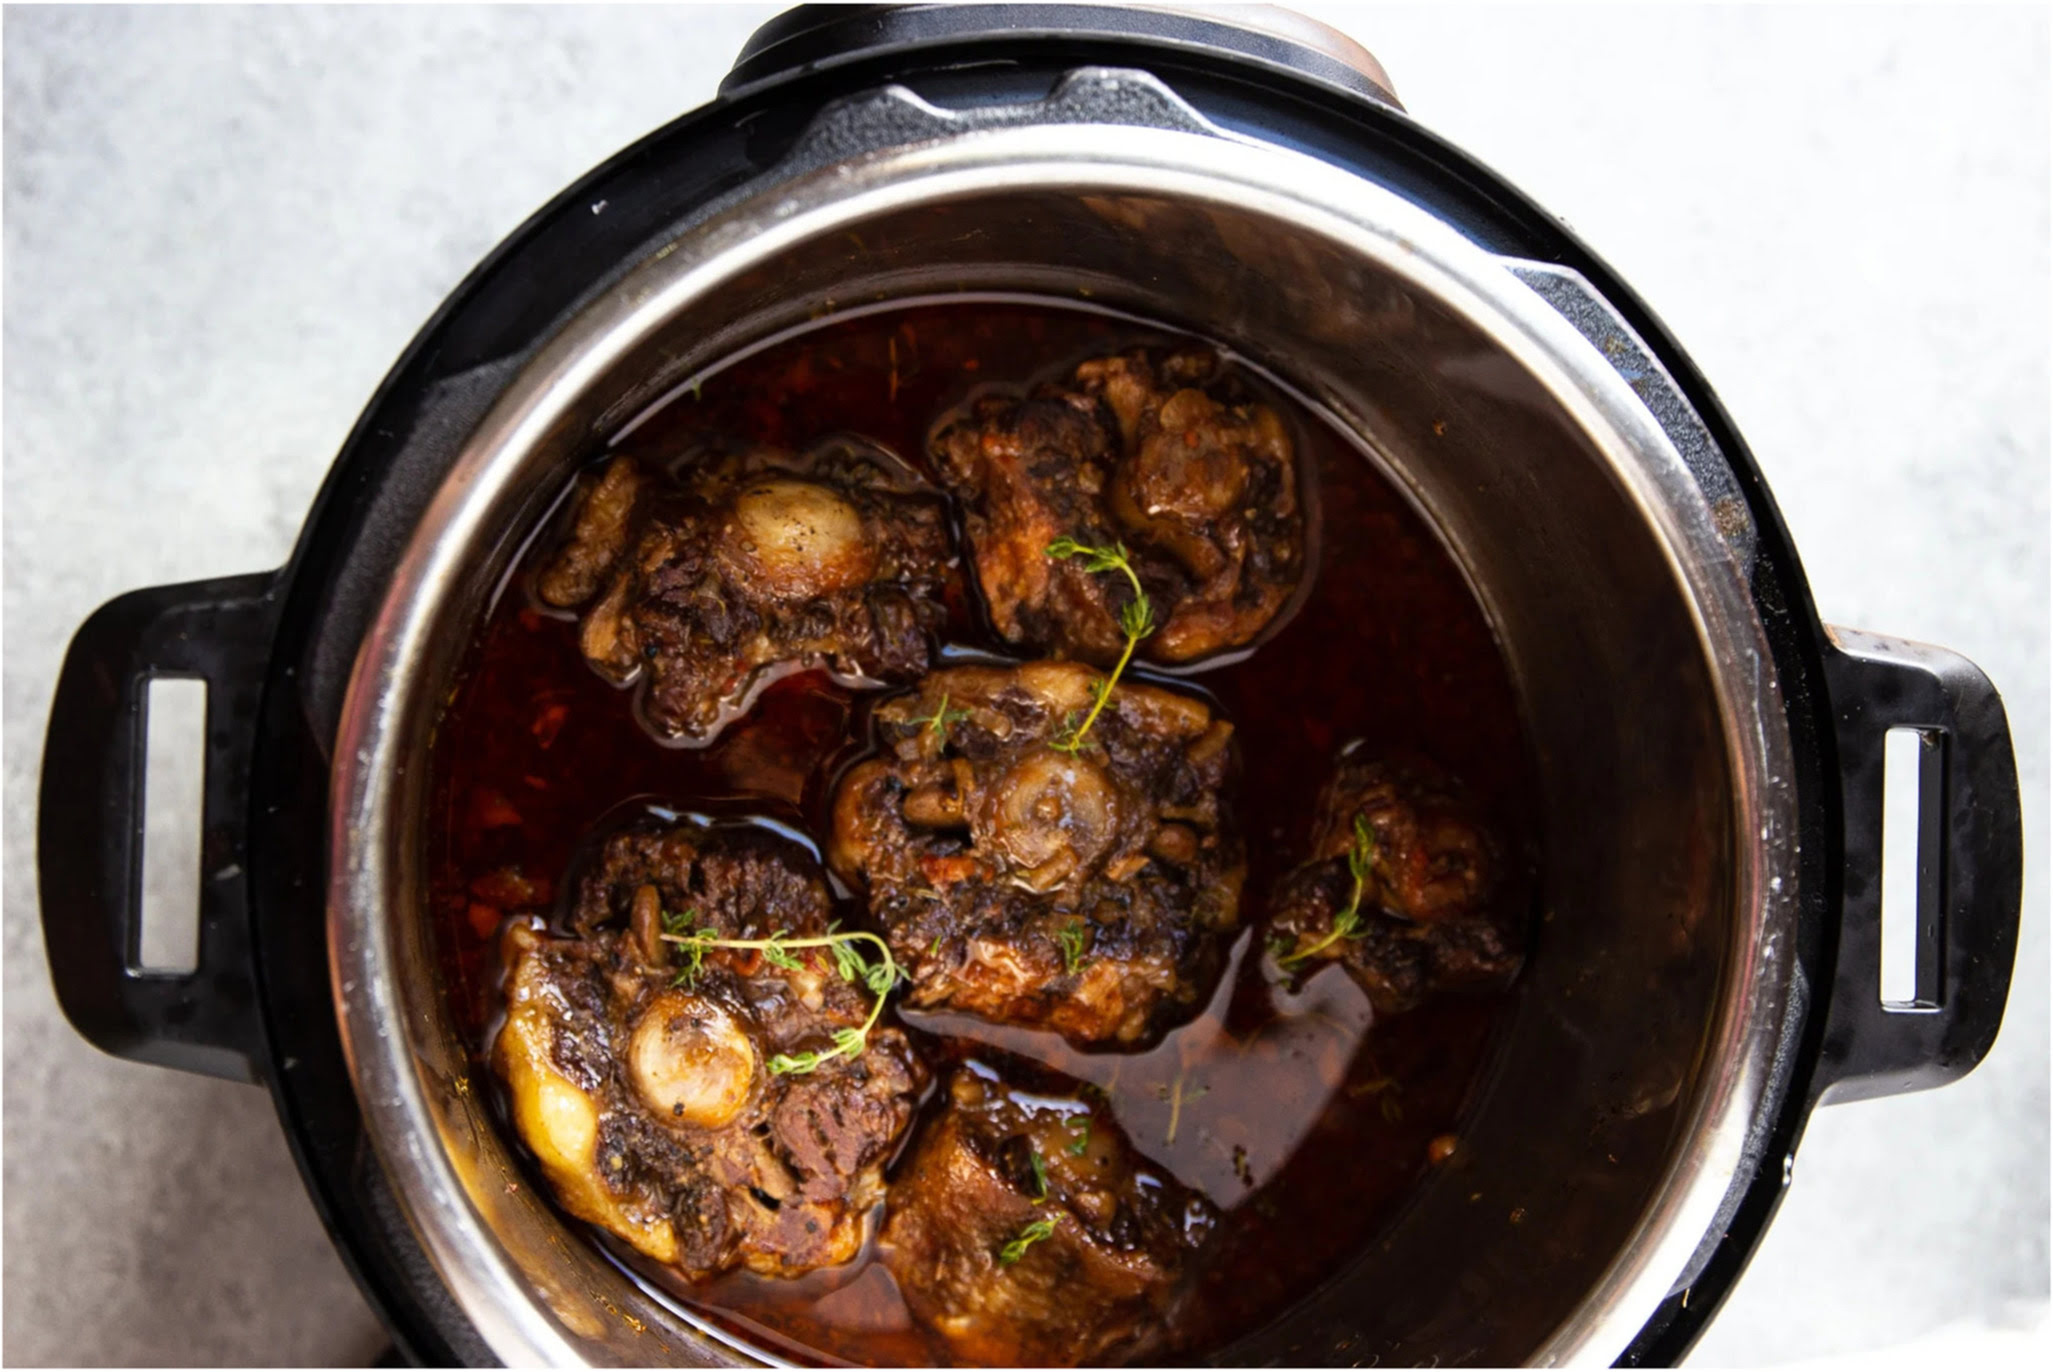 How To Cook Oxtails In An Electric Pressure Cooker